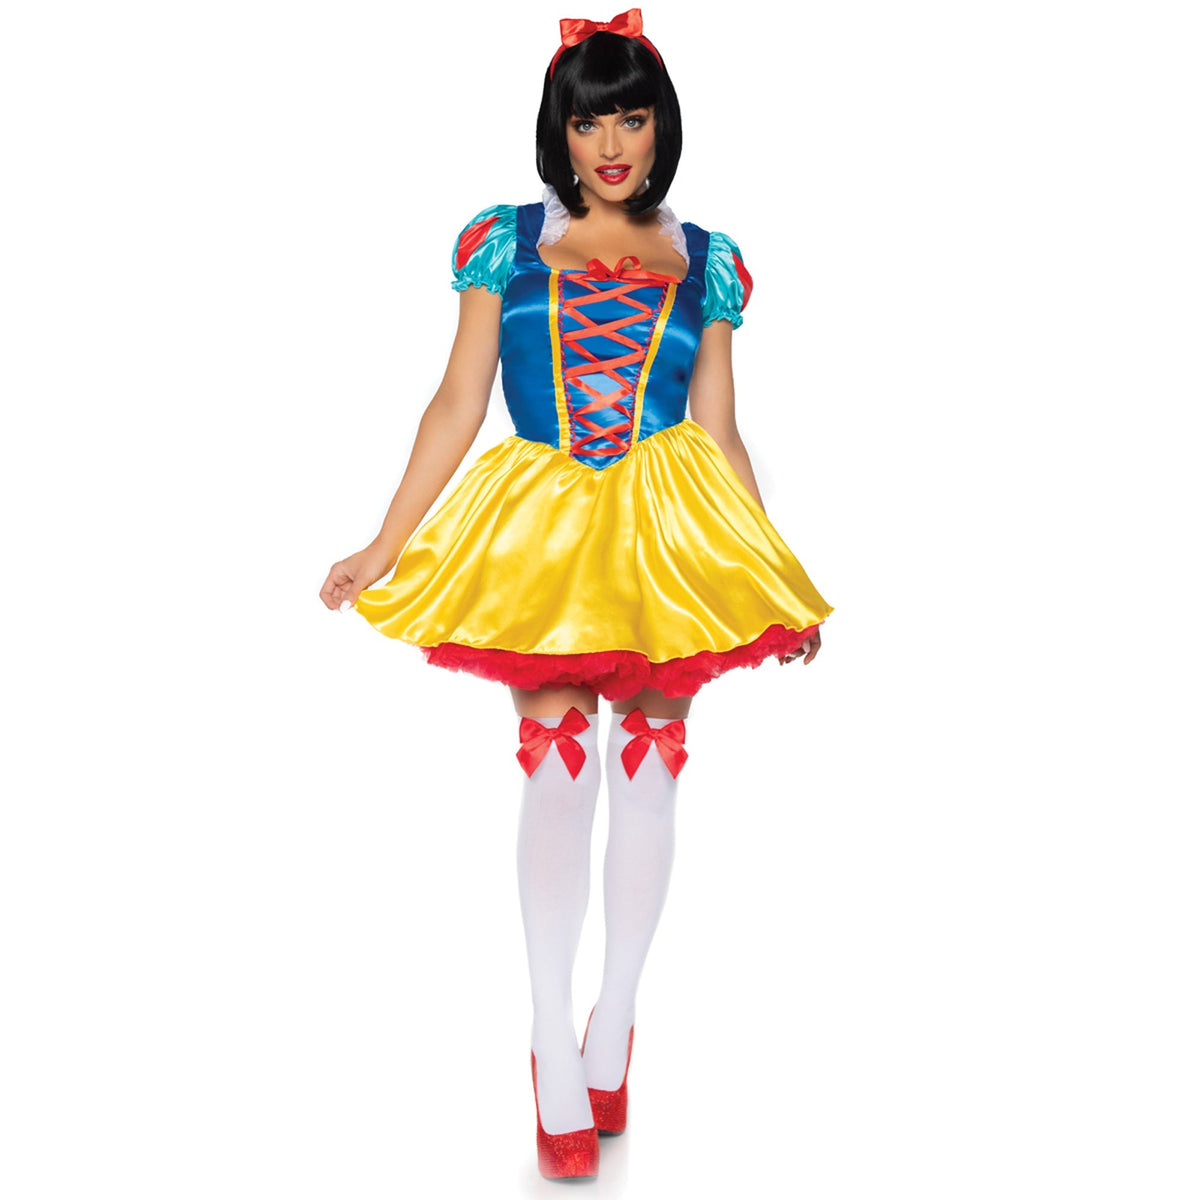 LEG AVENUE/SKU DISTRIBUTORS INC Costumes Snow White Costume for Adults, Short Yellow, Red and Blue Dress